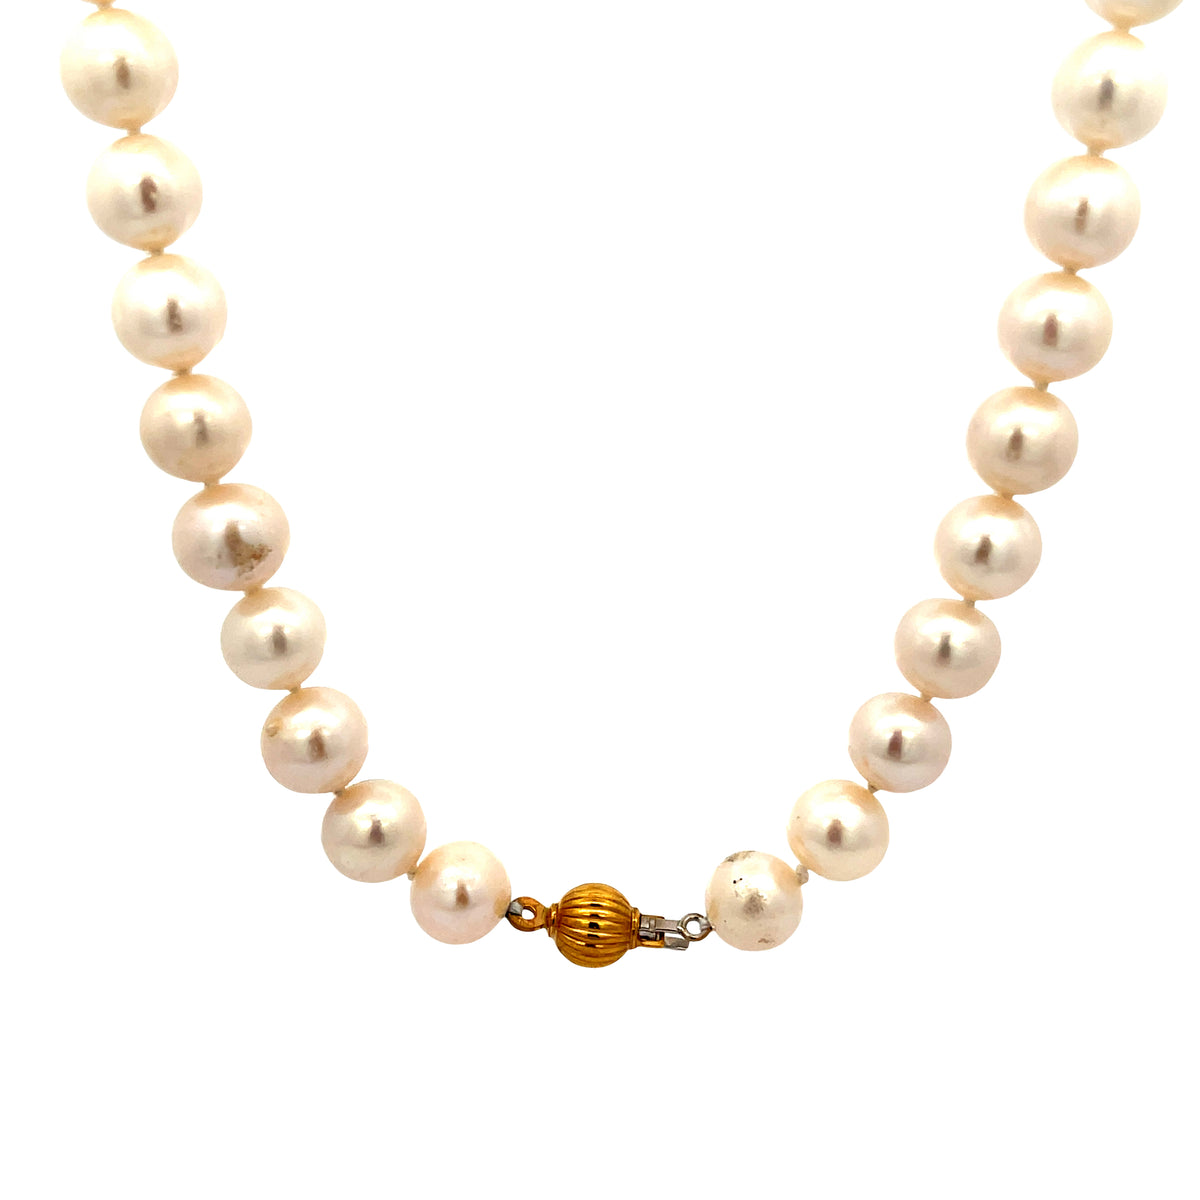 Ladies 18k yellow gold Cultured Pearl necklace